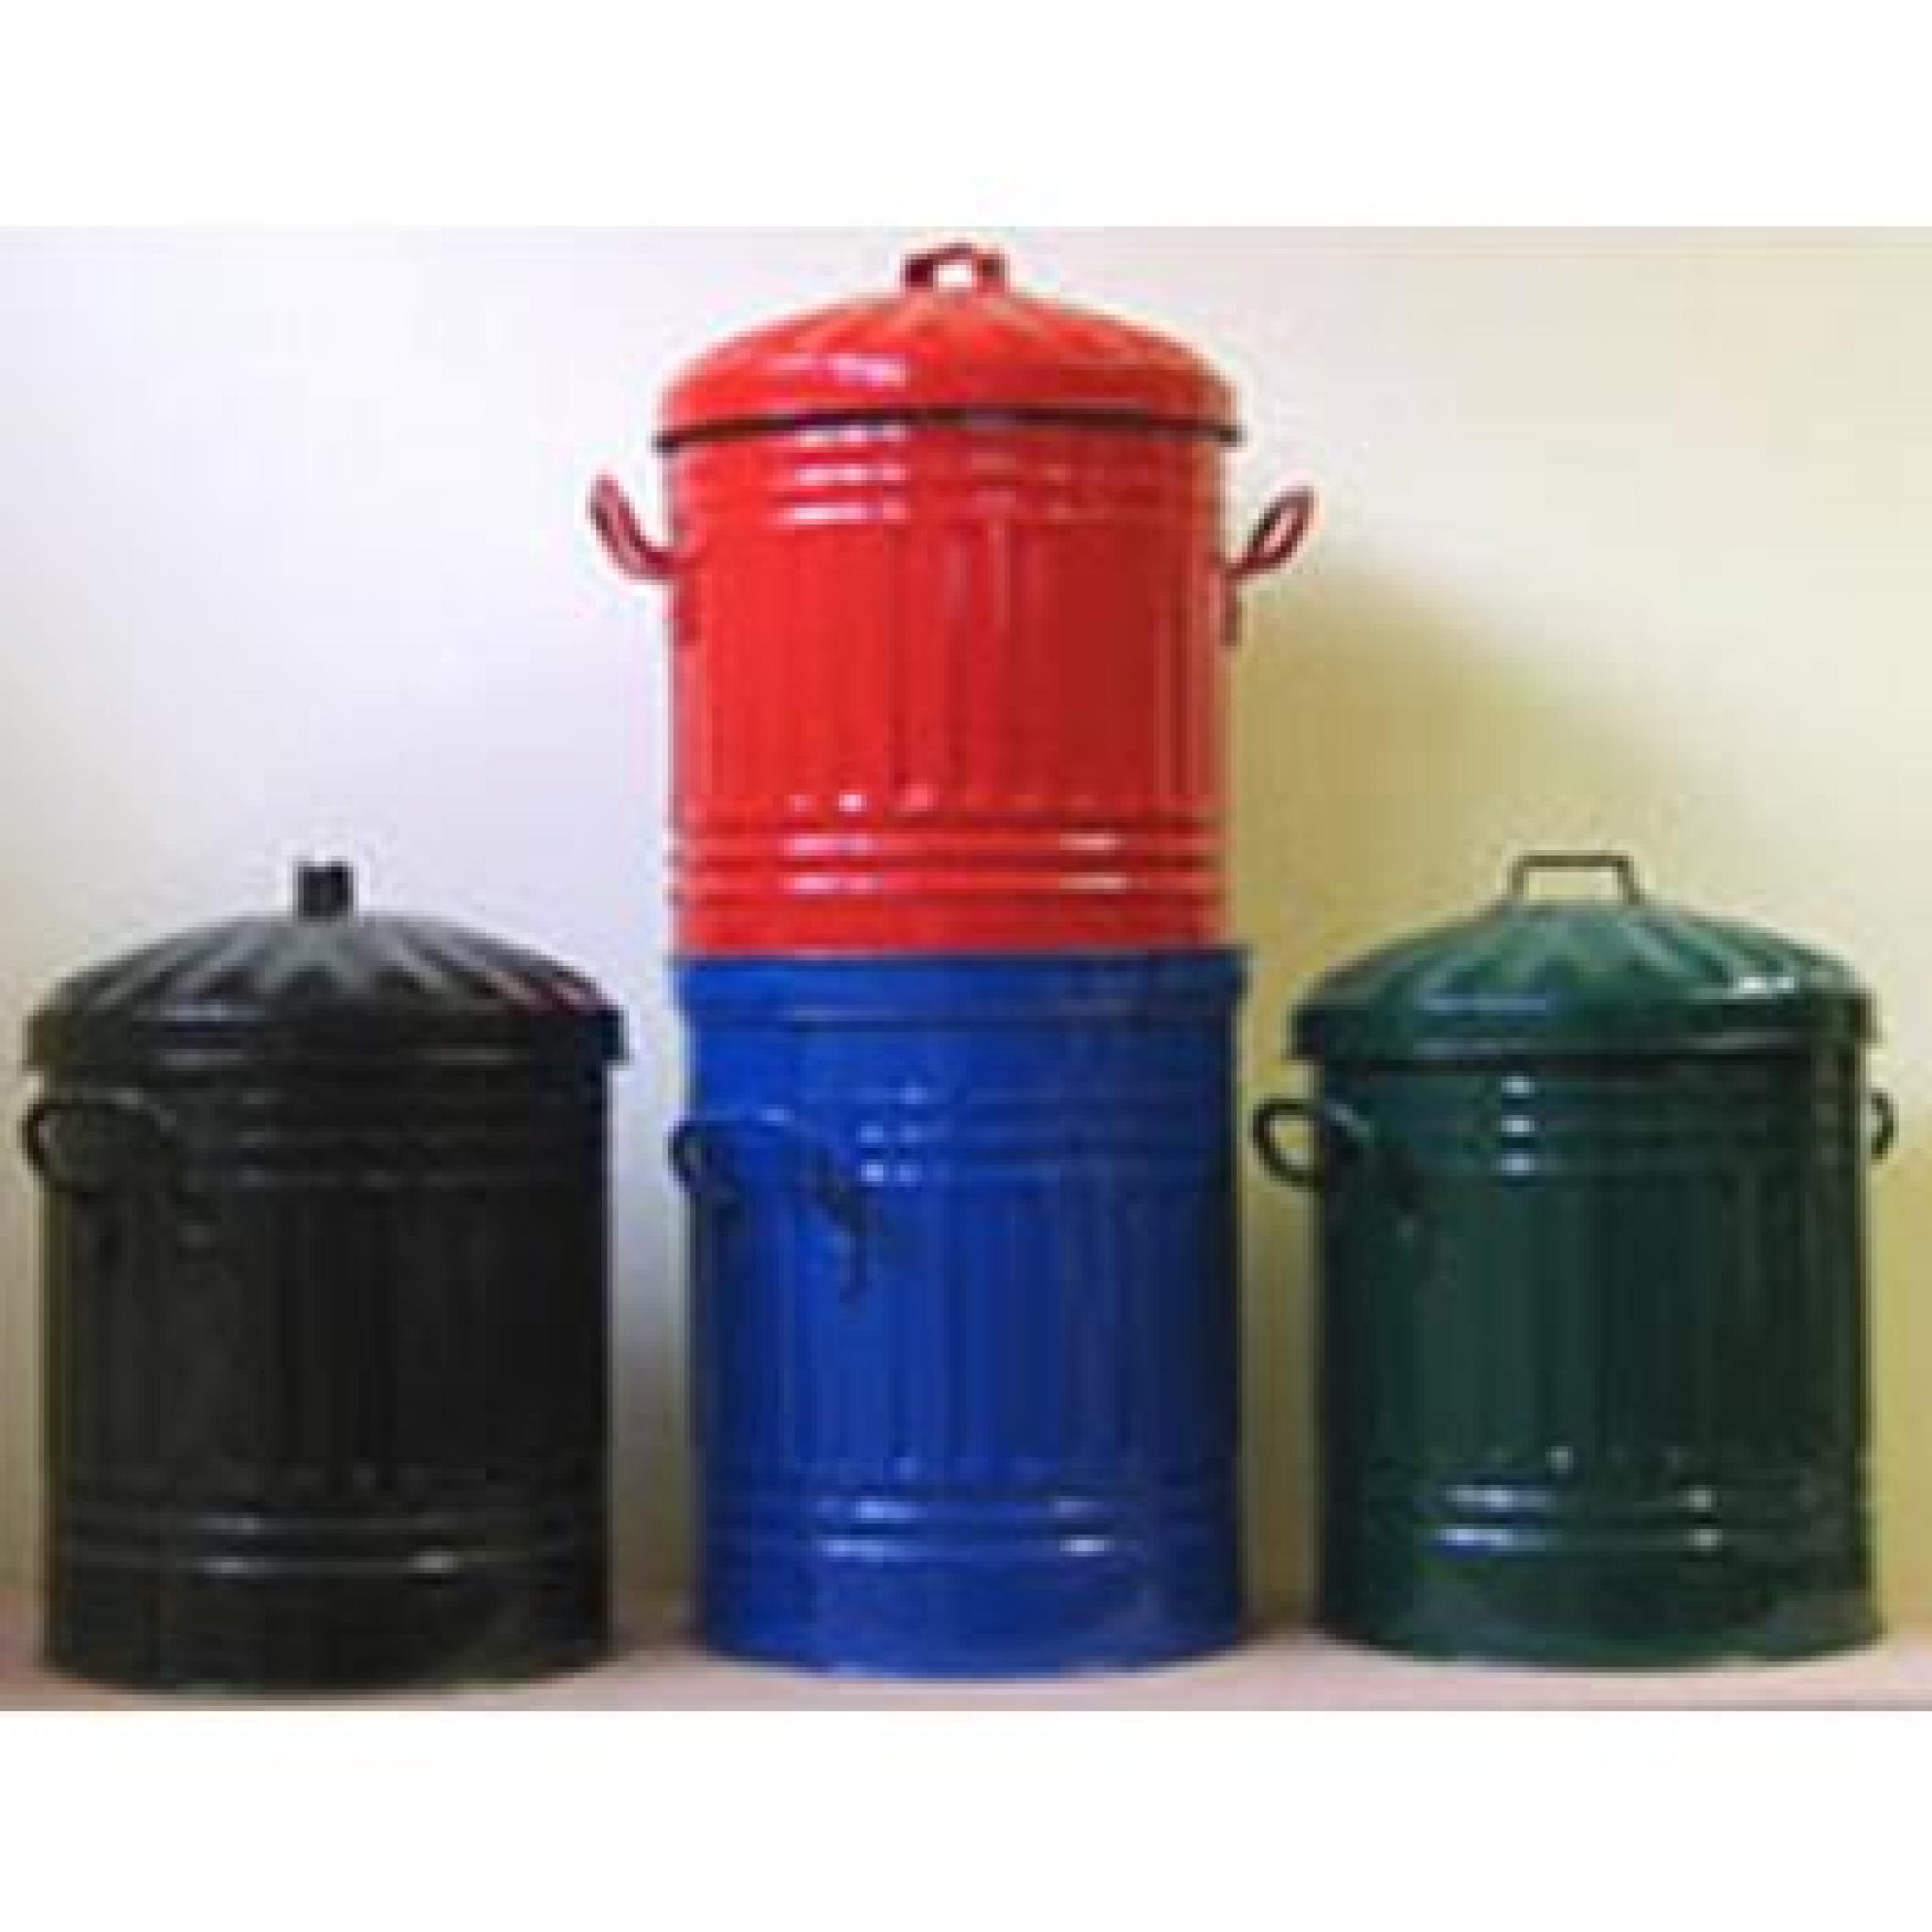 small metal bin with lid